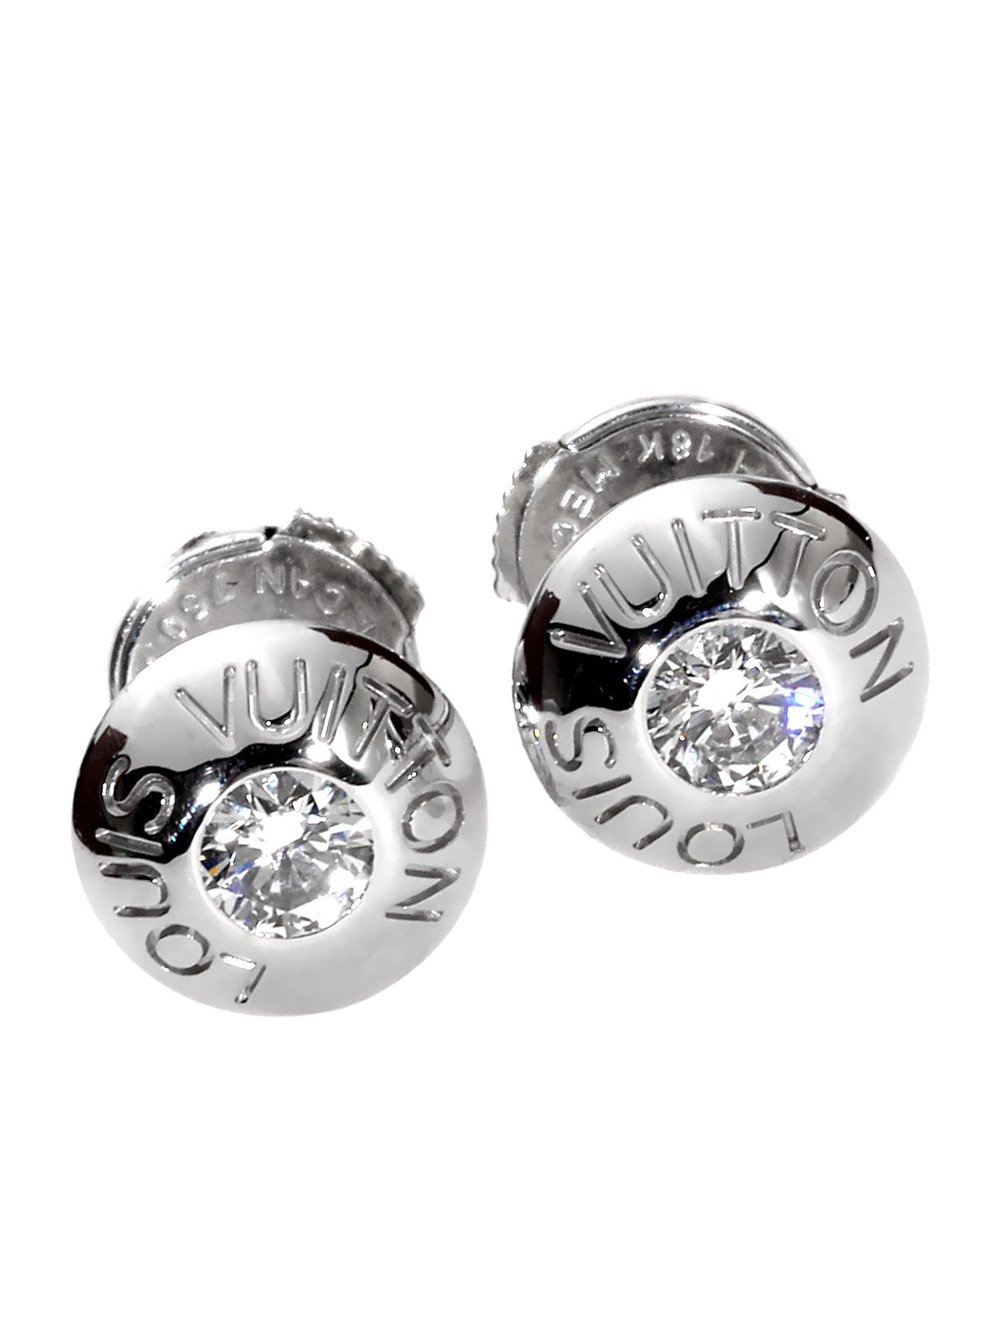 LV Volt One Cufflinks, White Gold And Diamonds - Categories